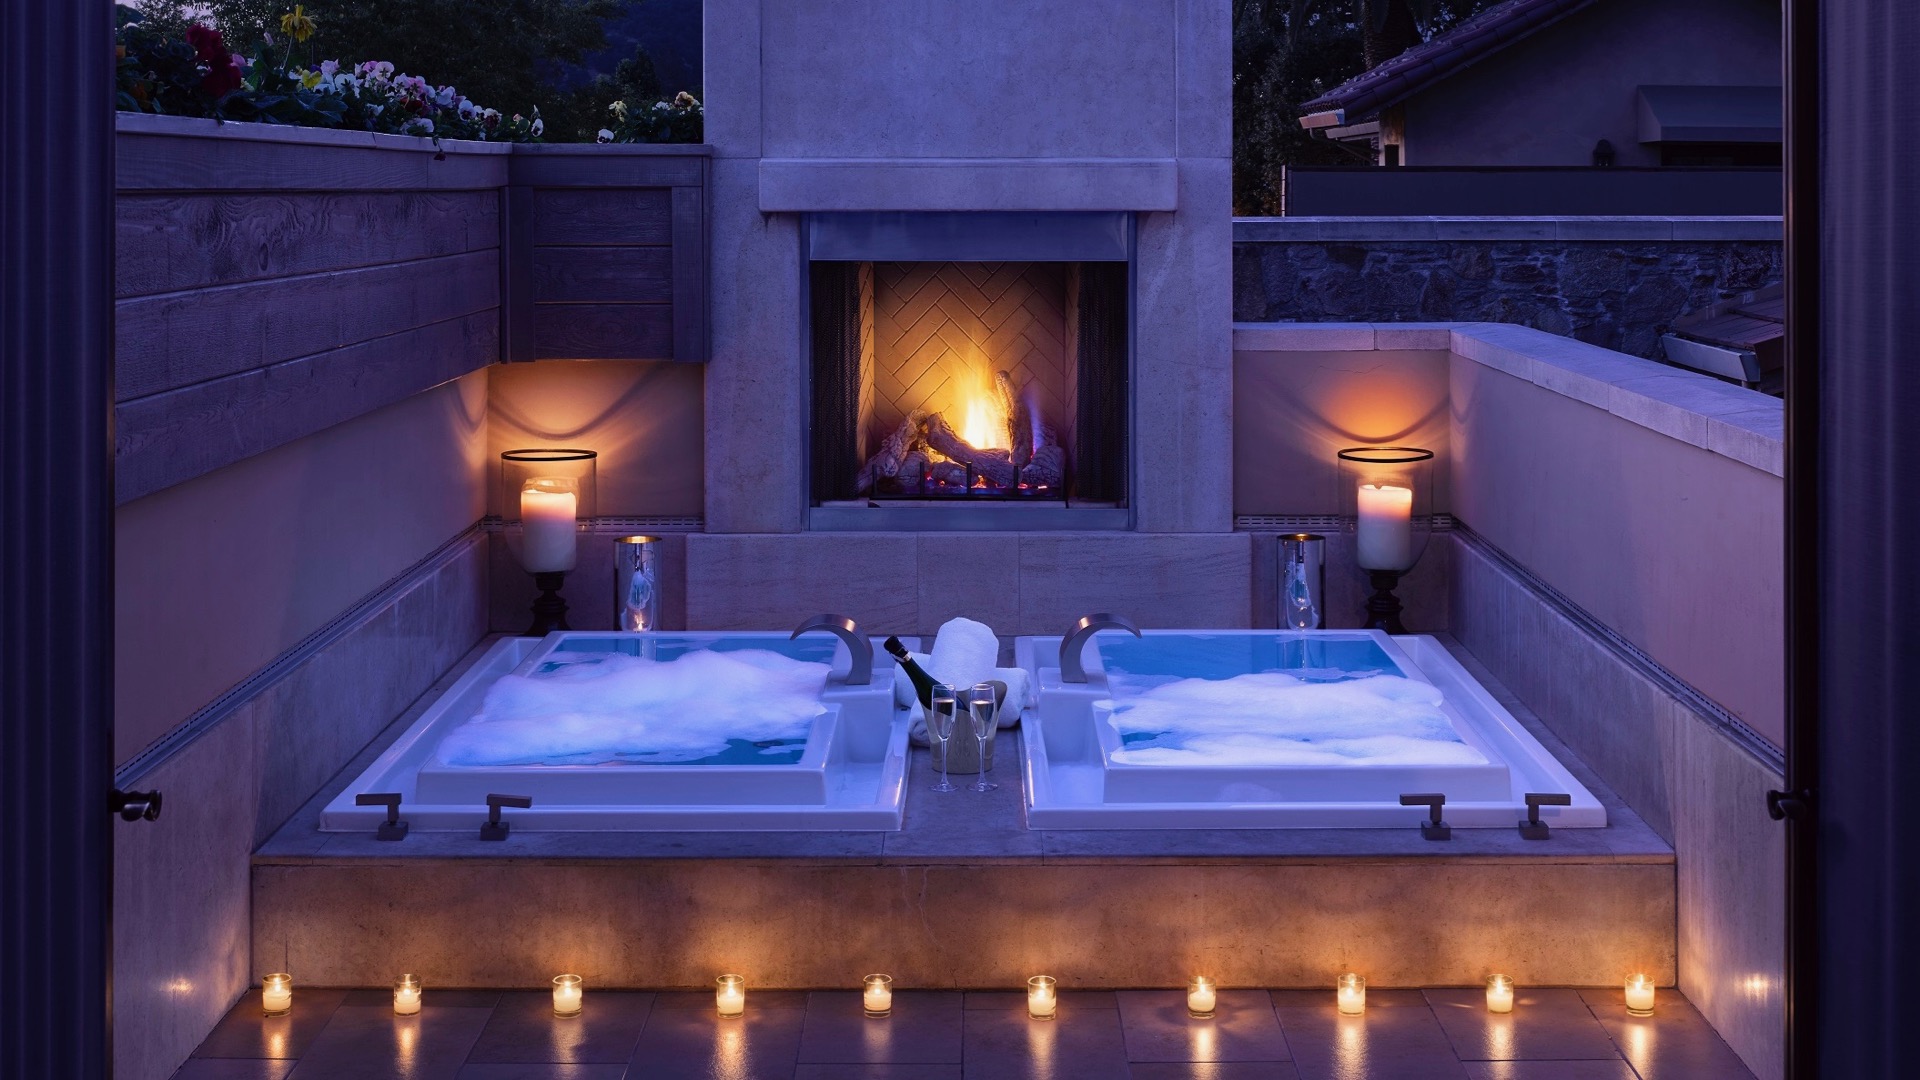 The Spa at The Estate Spas of America